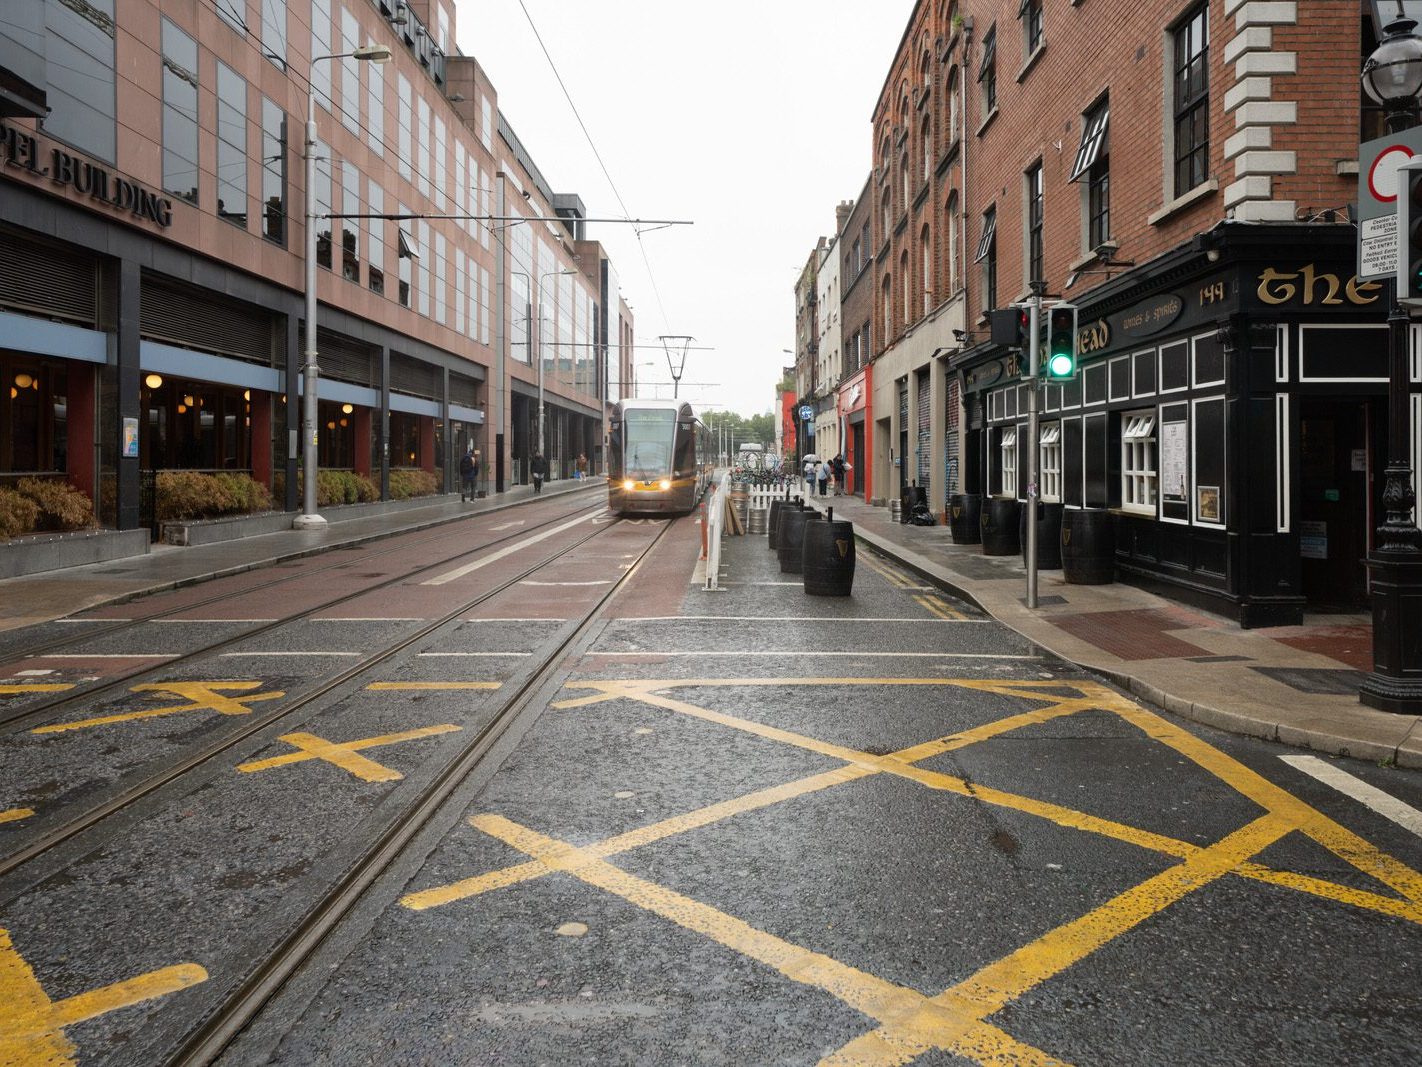 CAPEL STREET ON A DULL WET DAY [INTERIM CAPEL STREET IMPROVEMENT WORKS ARE NOW ONGOING] 026